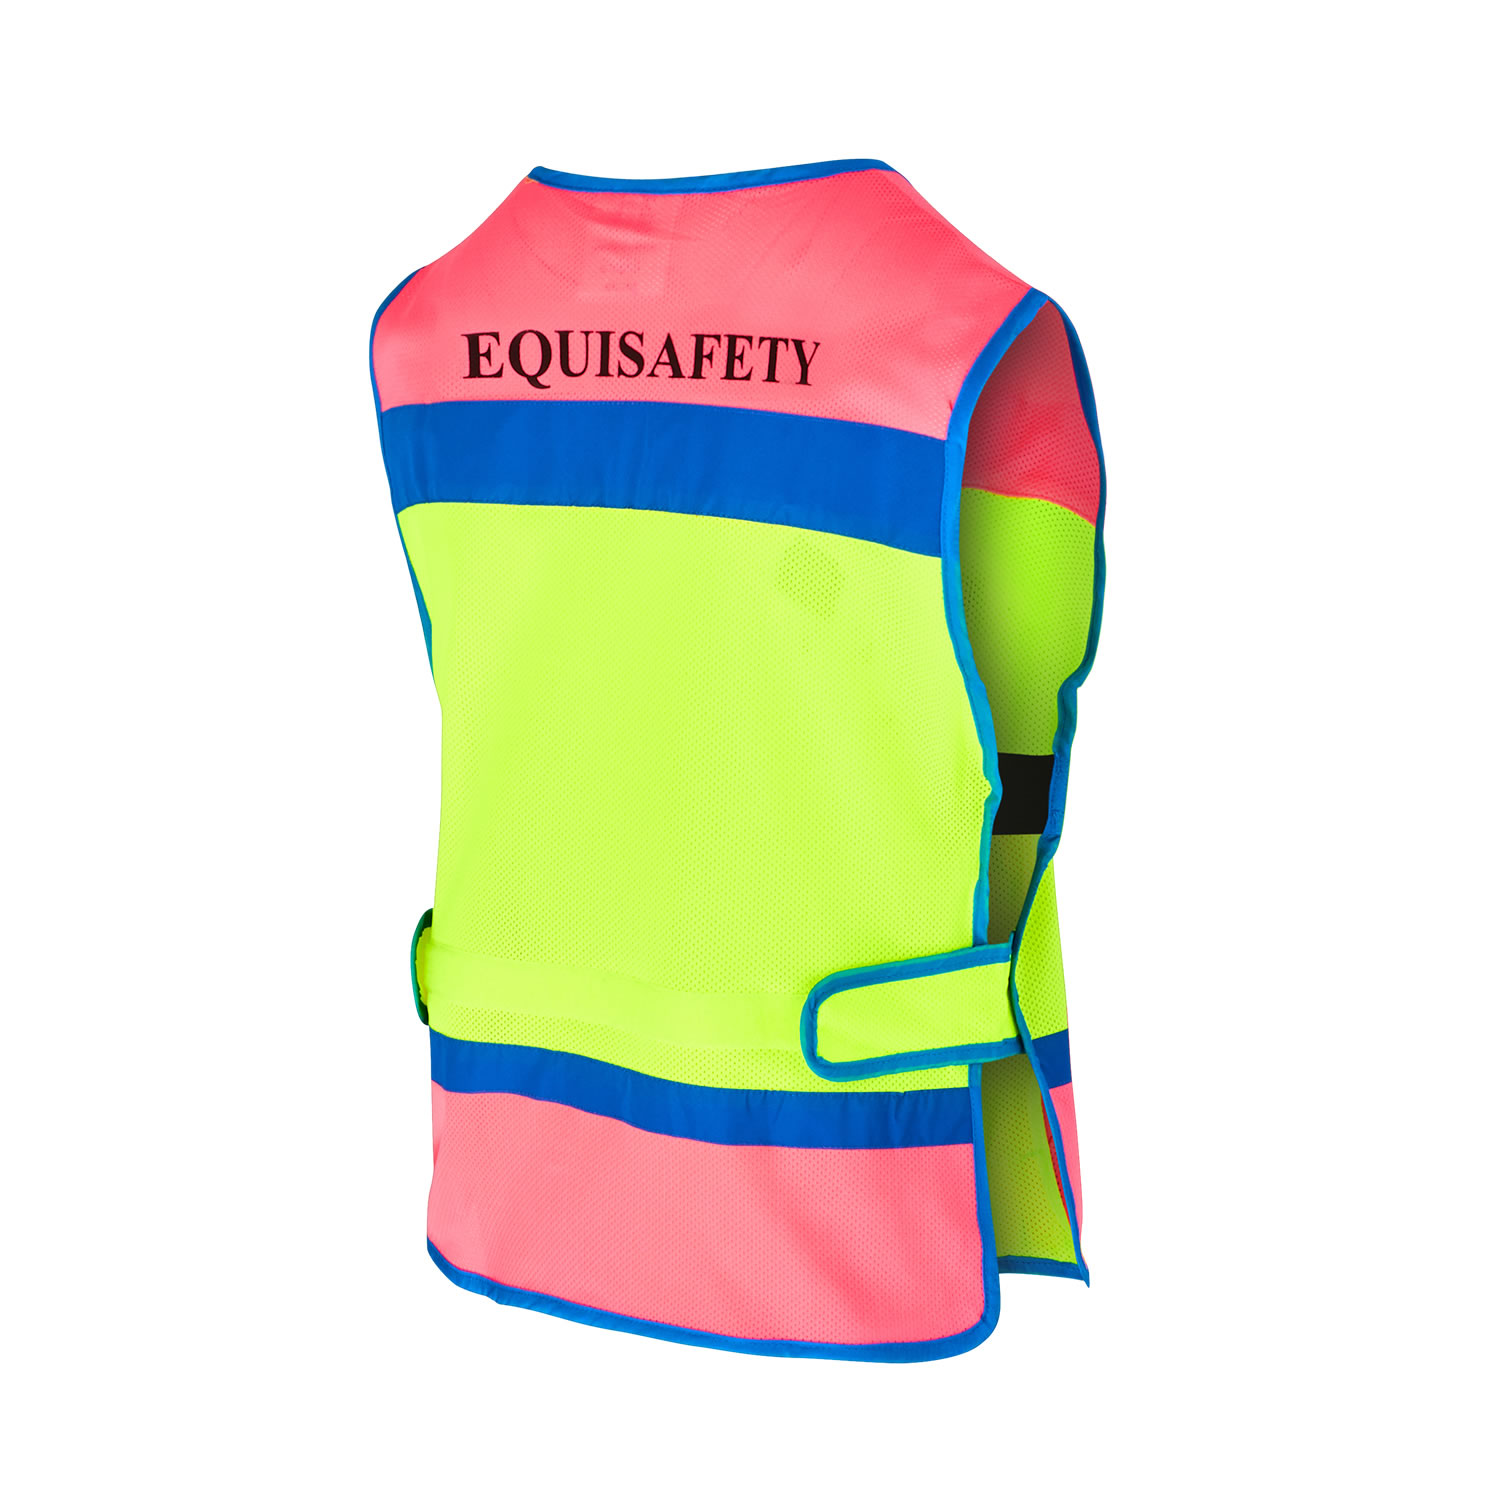 EQUISAFETY WAISTCOAT PINK/YELLOW